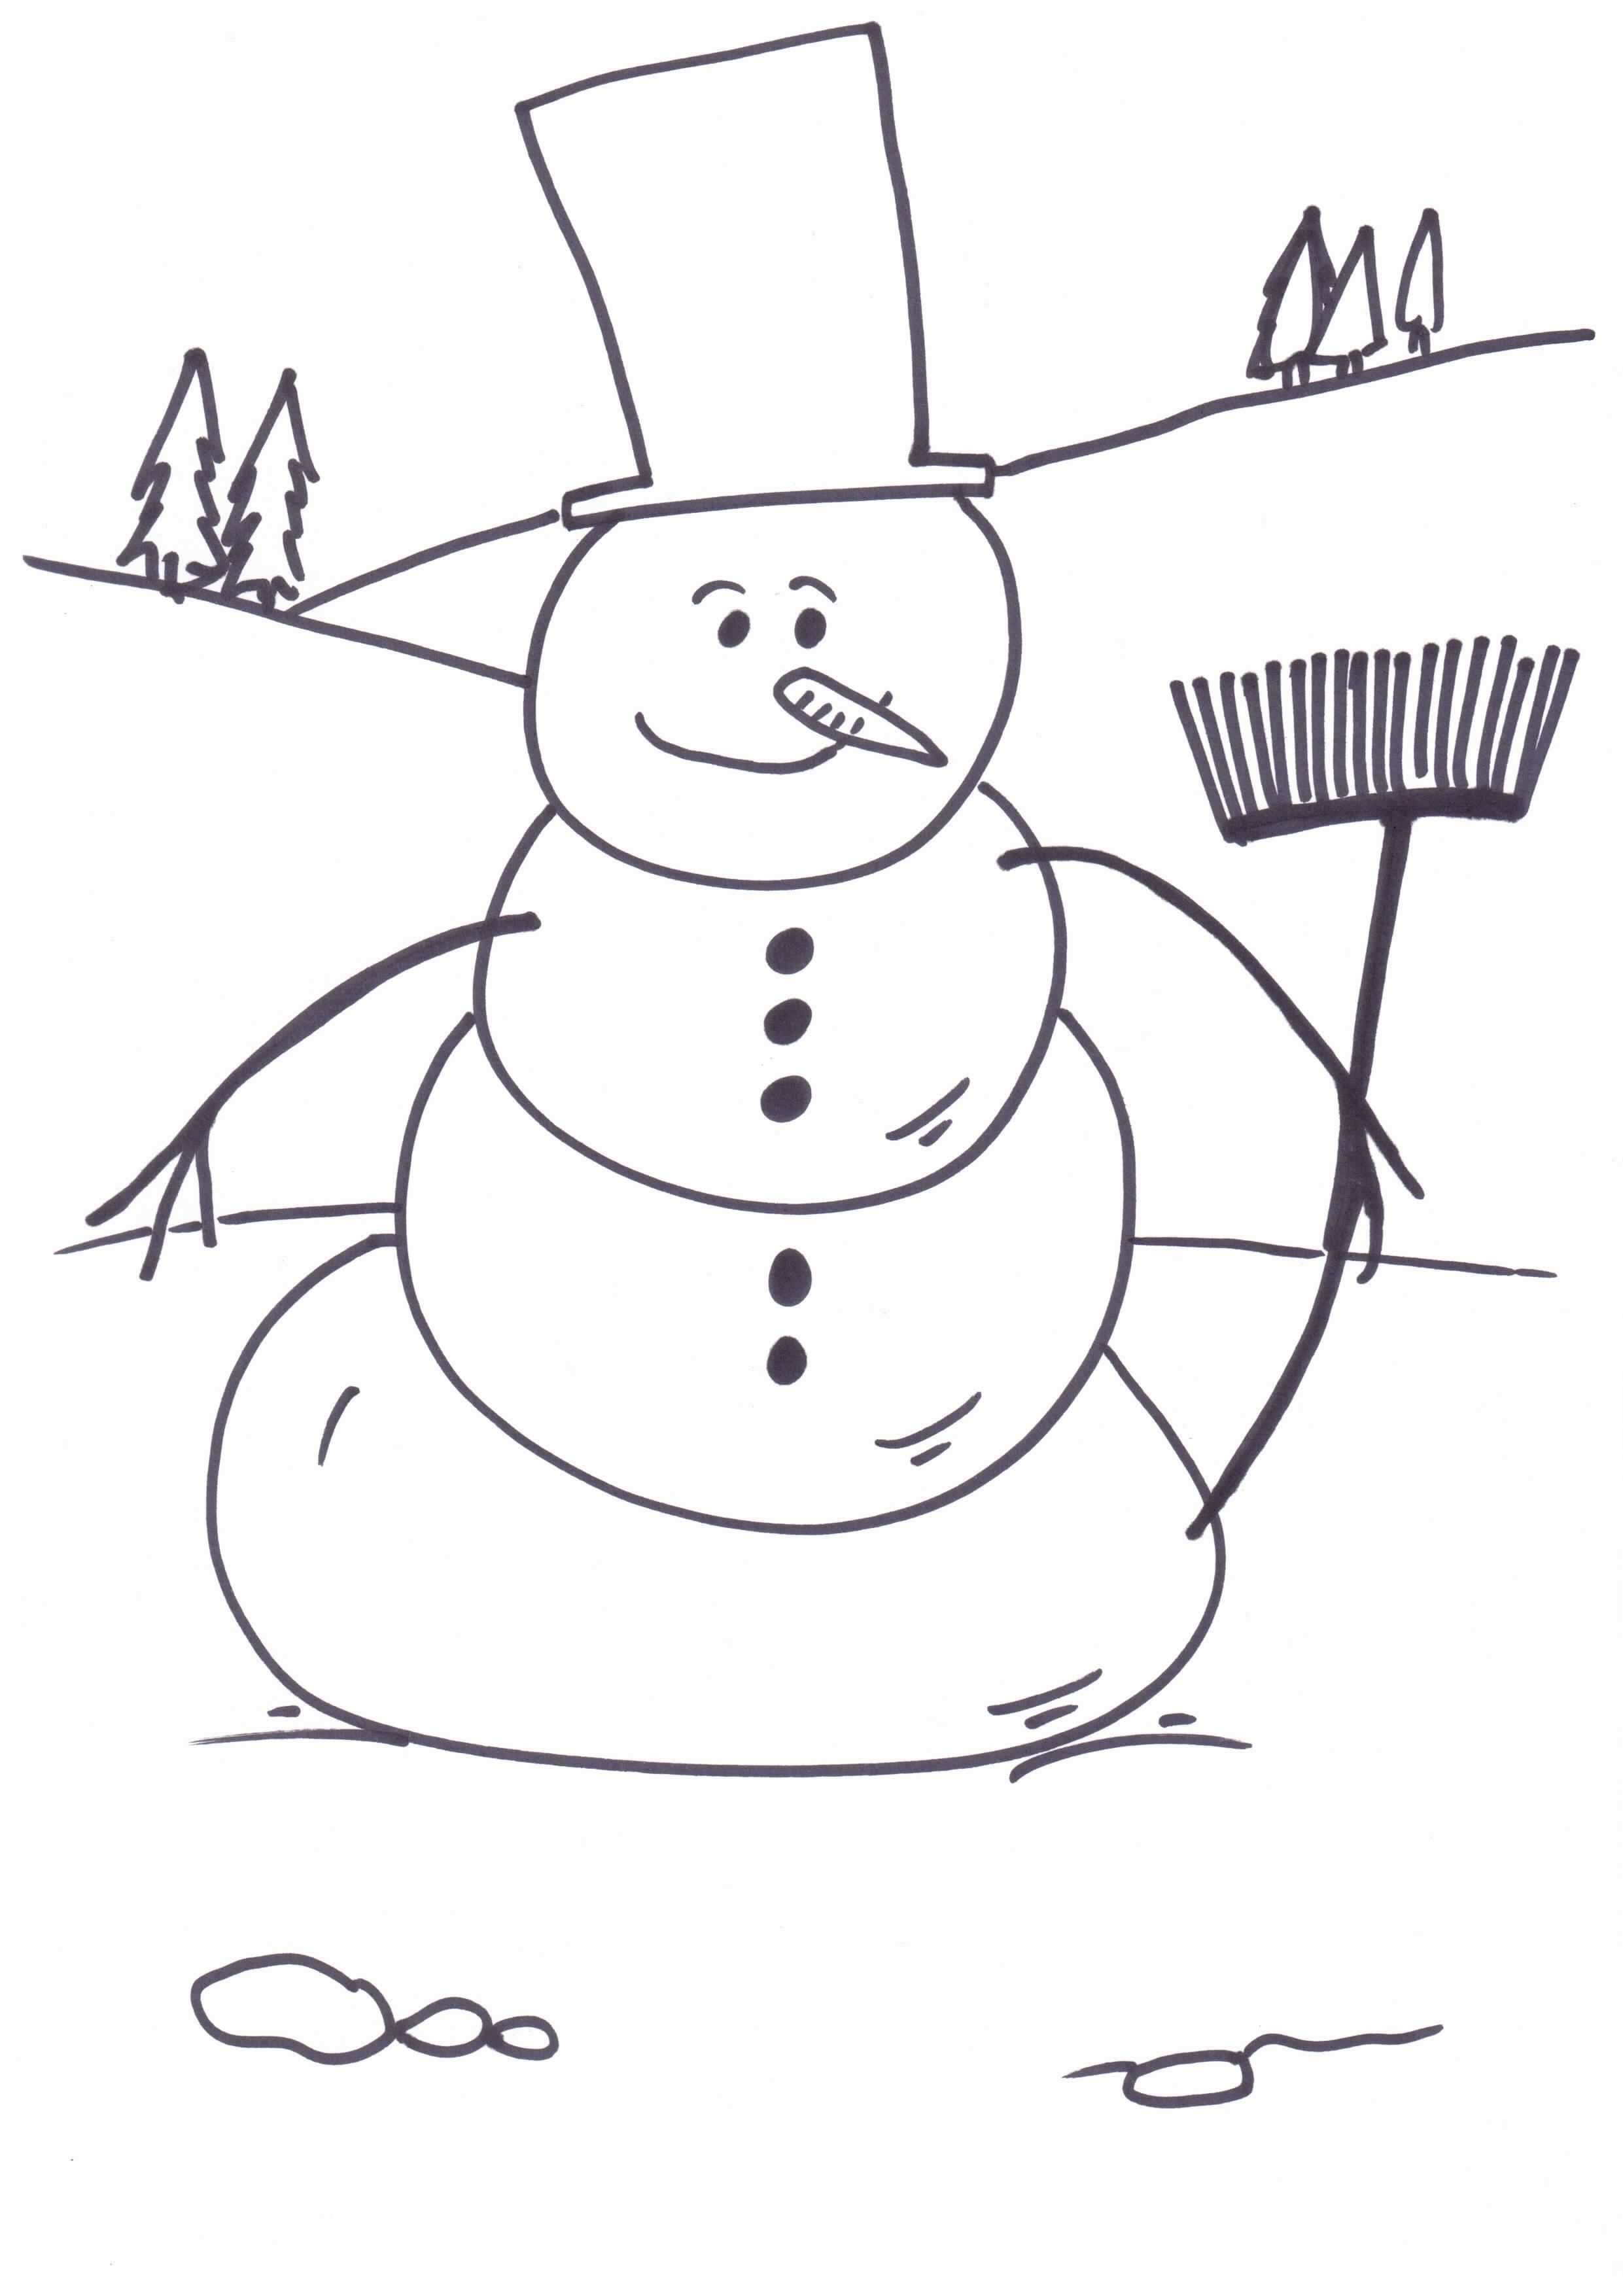 Coloring Pages Of Snowmen Free Printable Snowman Coloring Pages For Kids